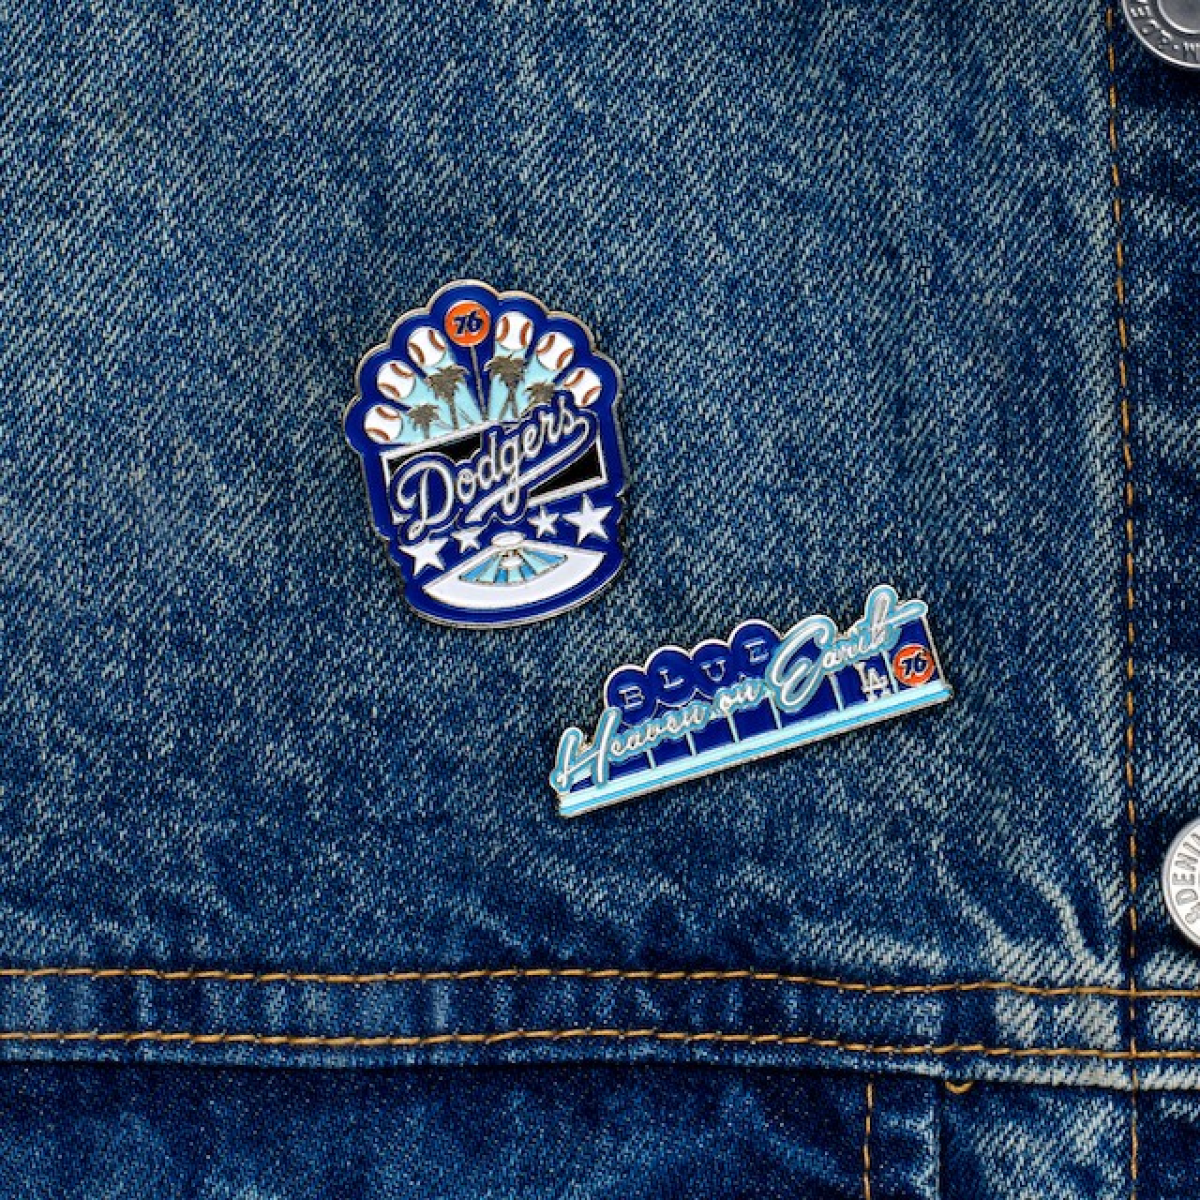 Two new Dodger pins